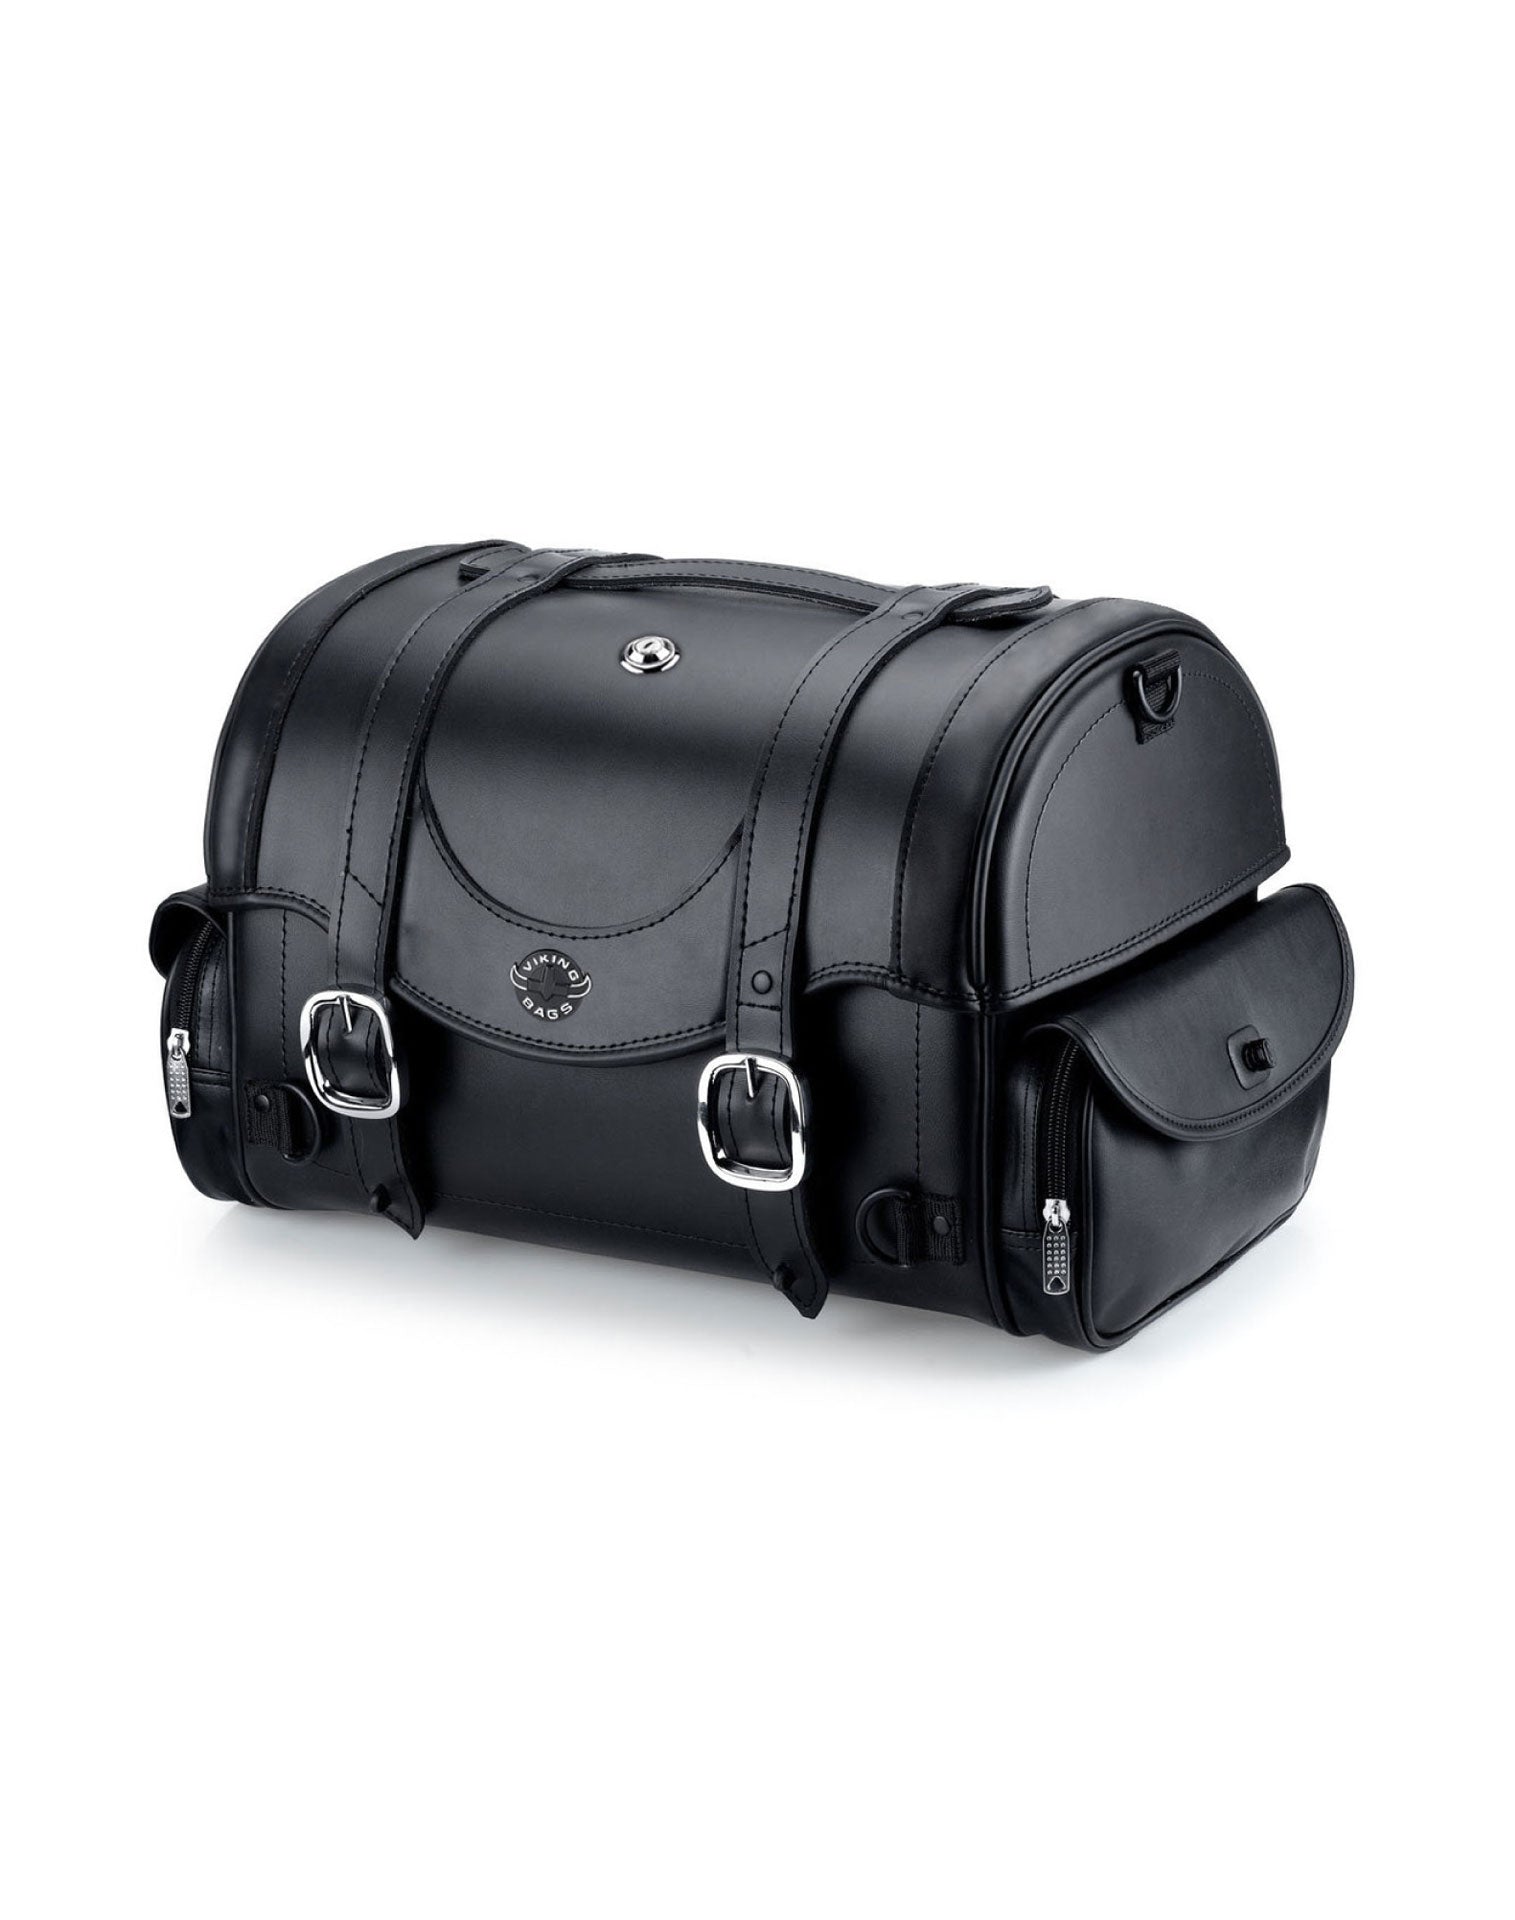 21L - Century Medium Indian Leather Motorcycle Tail Bag